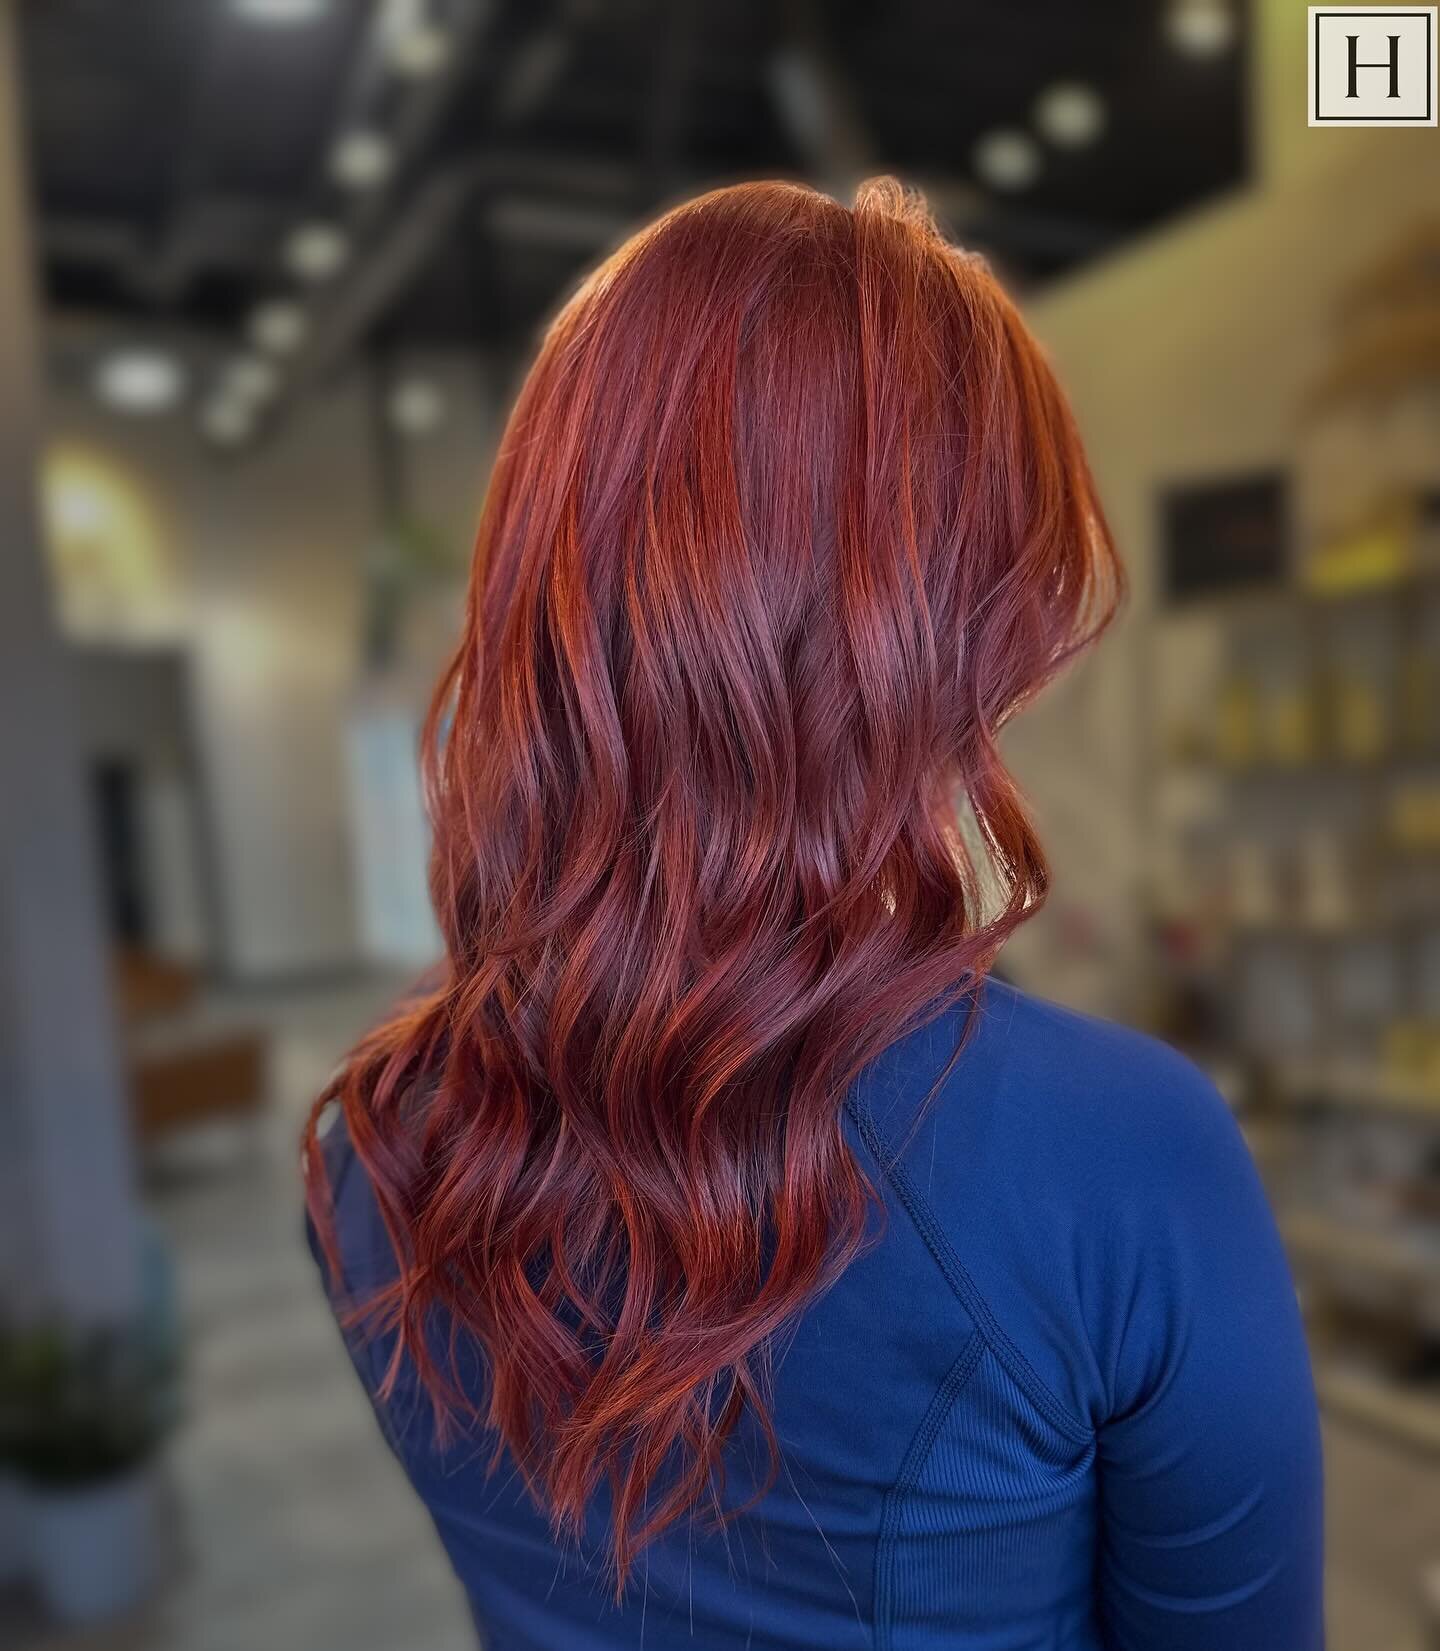 A little bit of color &amp; some 16&rdquo; tape-in extensions have her looking R E A D Y for February 14th! 😍❤️

Stylist: @_daisydoesmyhair 

#hair #hairstylist #hairsalon #hydesalon #hydechapin #chapinsc #chapincommons #lakemurray #lakemurraysc #la